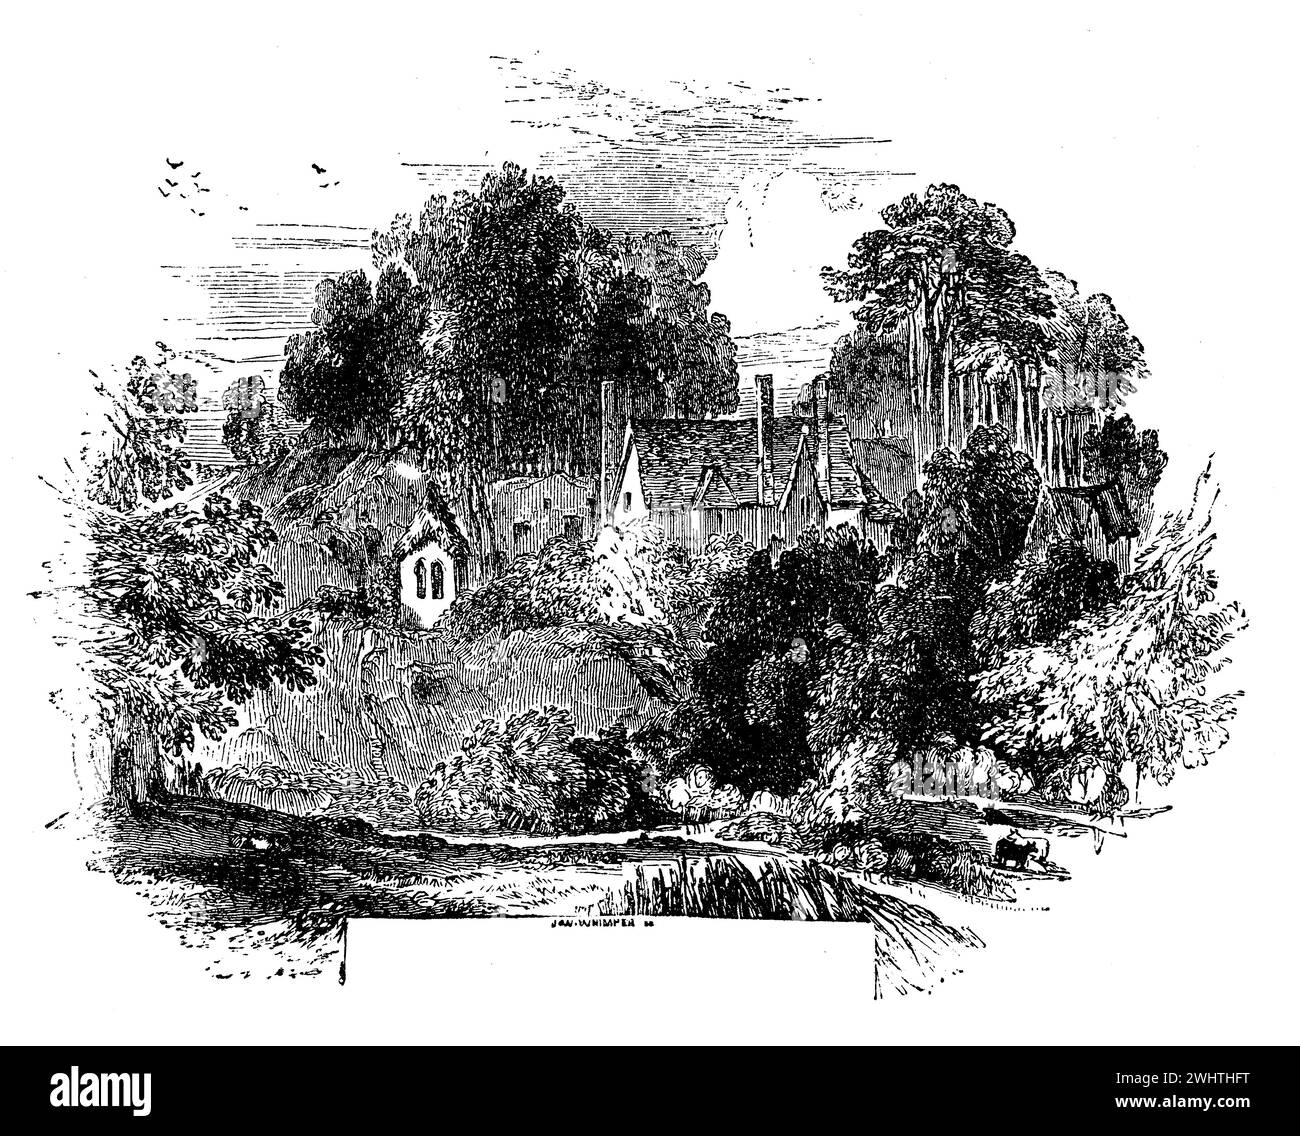 Sketch of Guy's Cliff, Warwick in the 17th century; Black and White Illustration from the 'Old England' published by James Sangster in 1860. Stock Photo